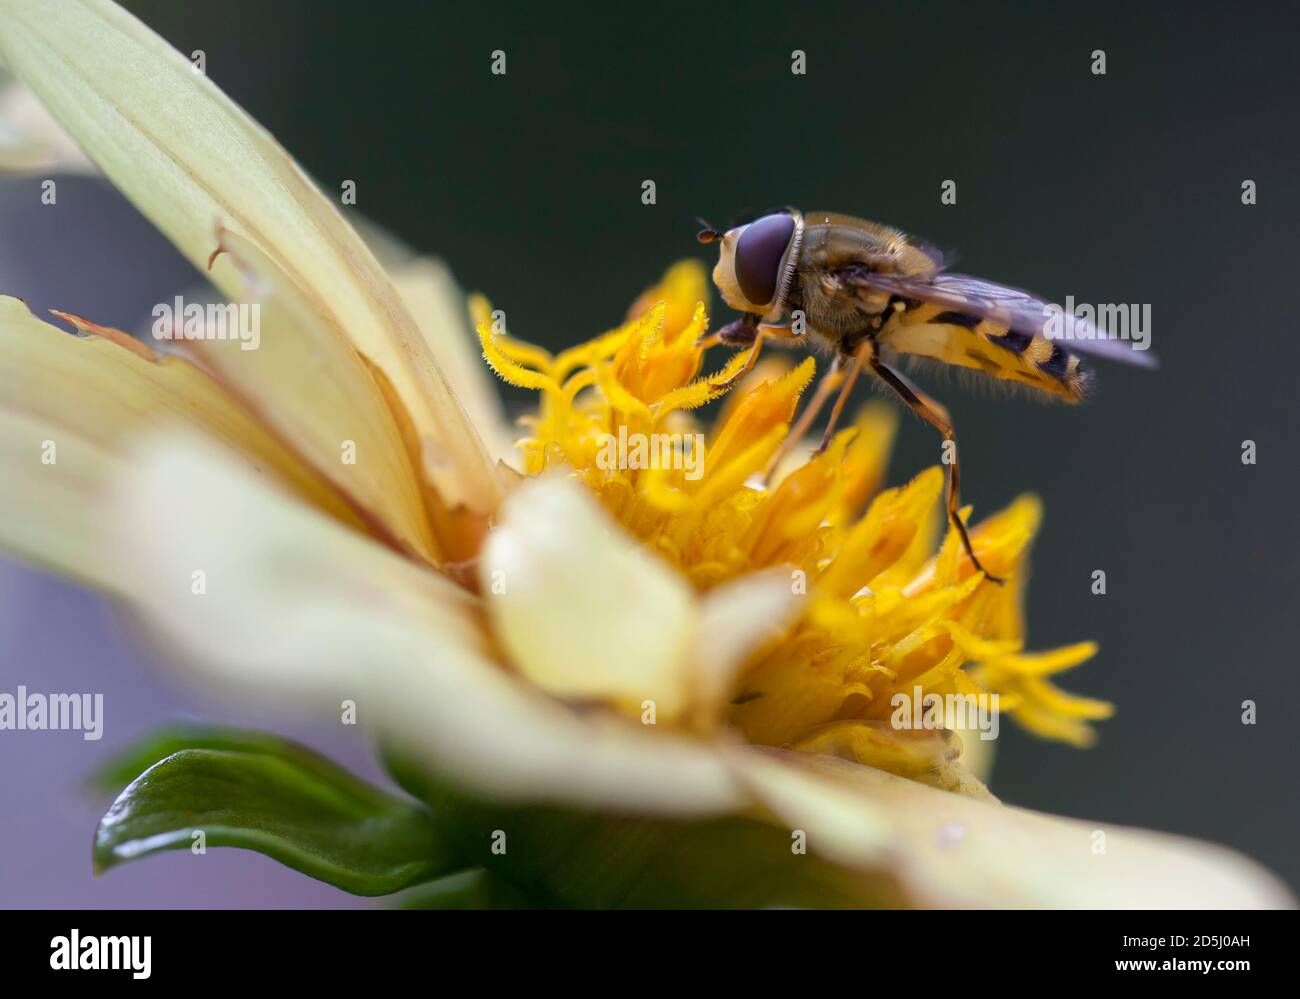 Marmalade Hoverfly feeding on nectar and pollen from a yellow Dahlia flower. Stock Photo